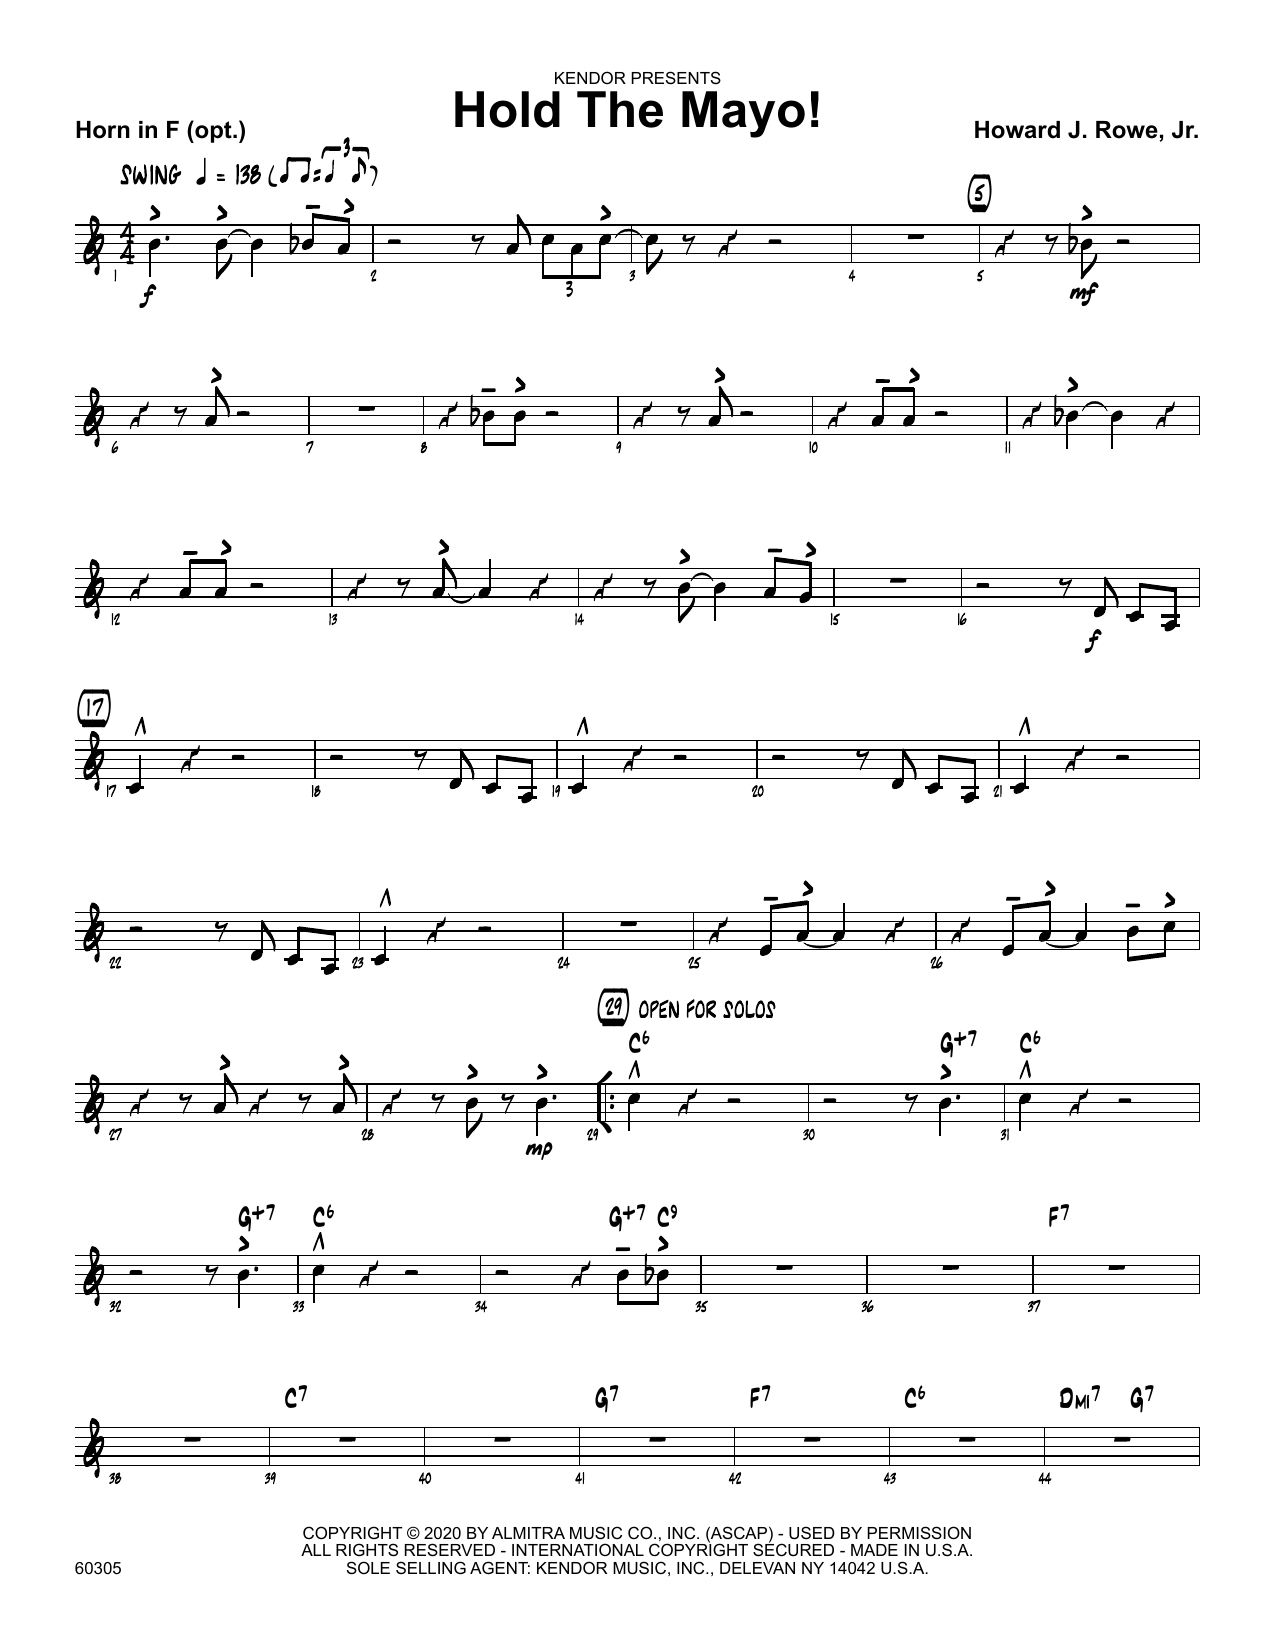 Download Howard Rowe Hold The Mayo! - Horn in F Sheet Music